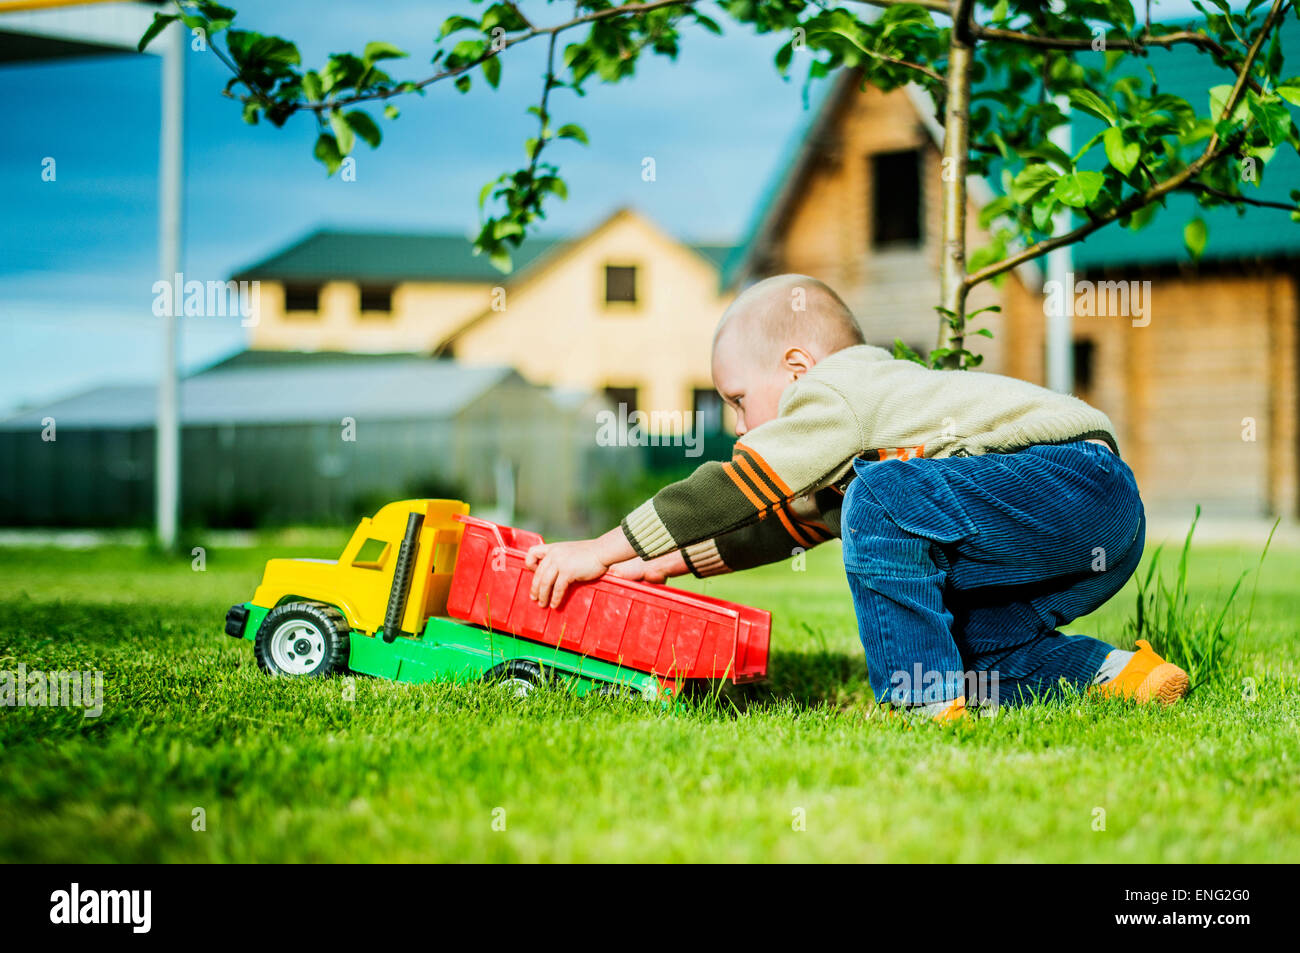 Caucasian boy playing with toy truck in backyard Stock Photo